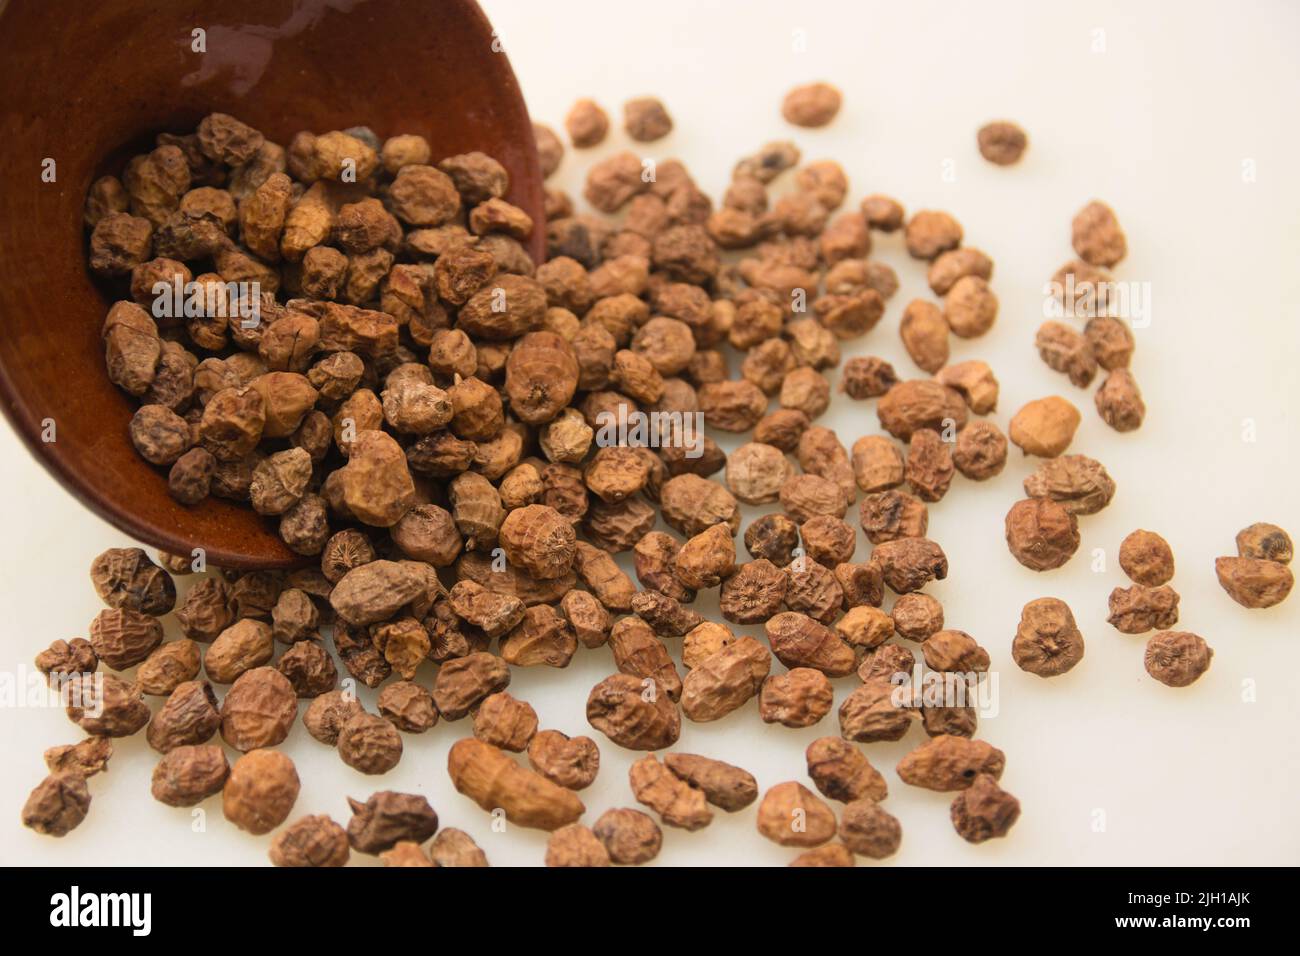 Close-up of a bunch of dried tiger nuts (cyperus esculentus) scattered on a white table with copy space Stock Photo